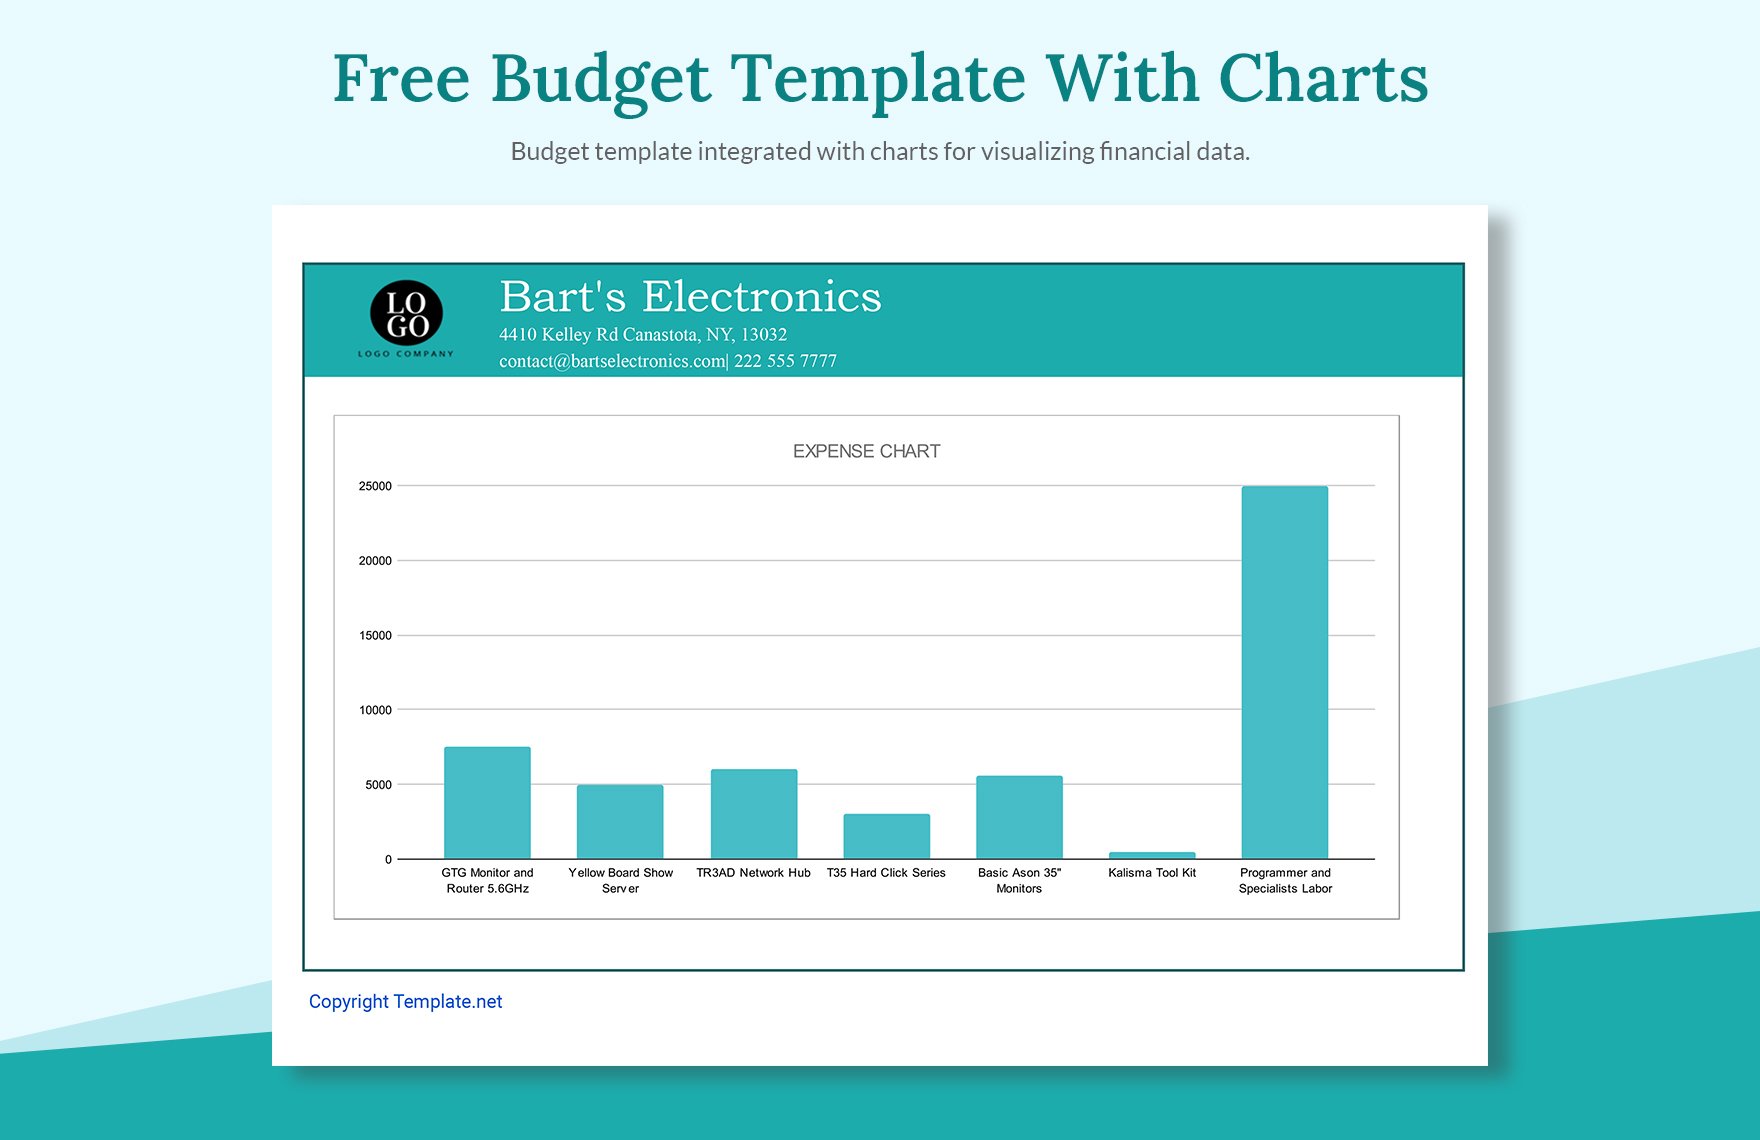 Free Budget Template With Charts